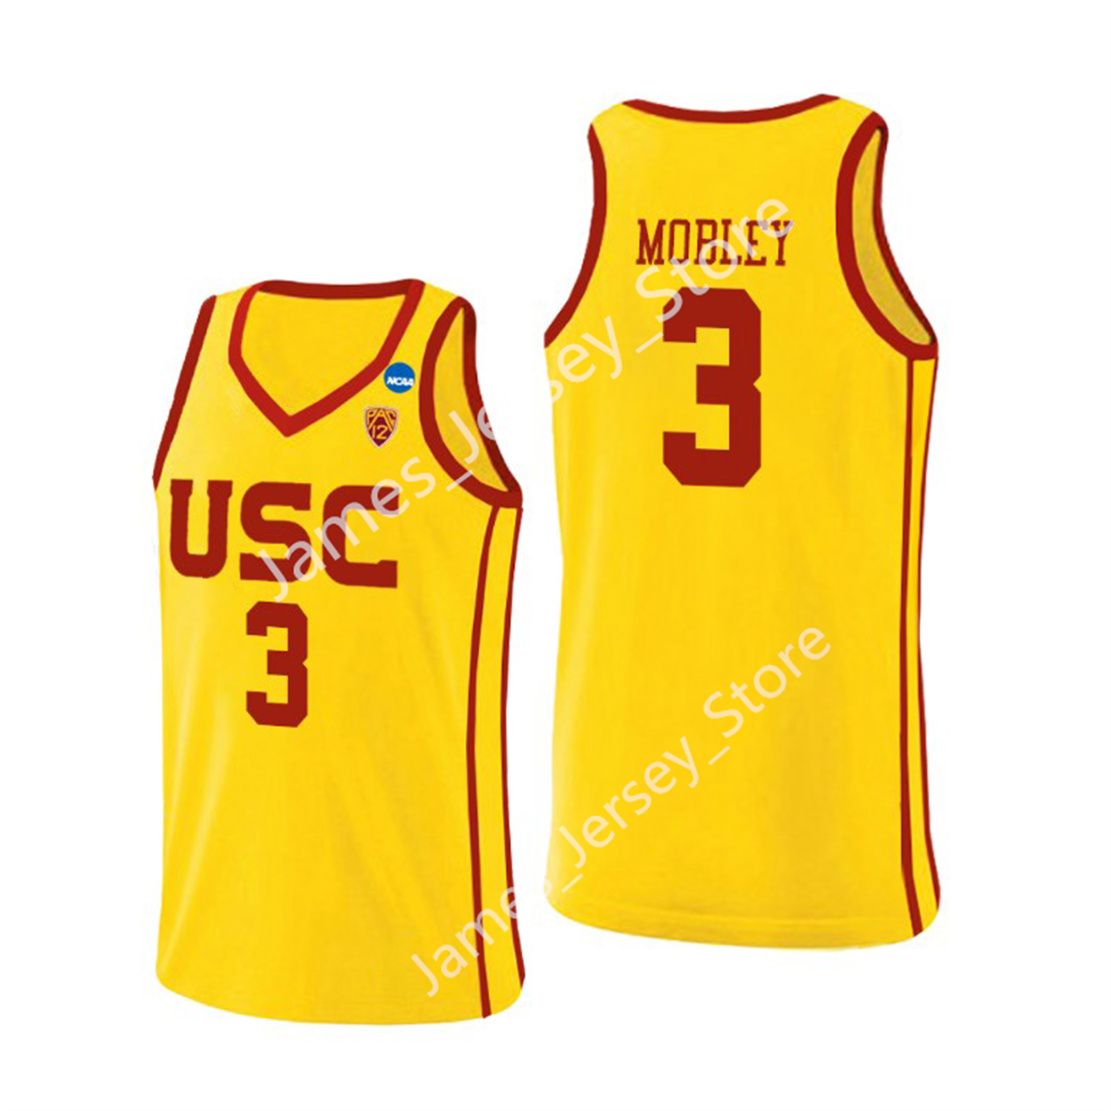 3 Isaiah Mobley Basketball Jersey_8